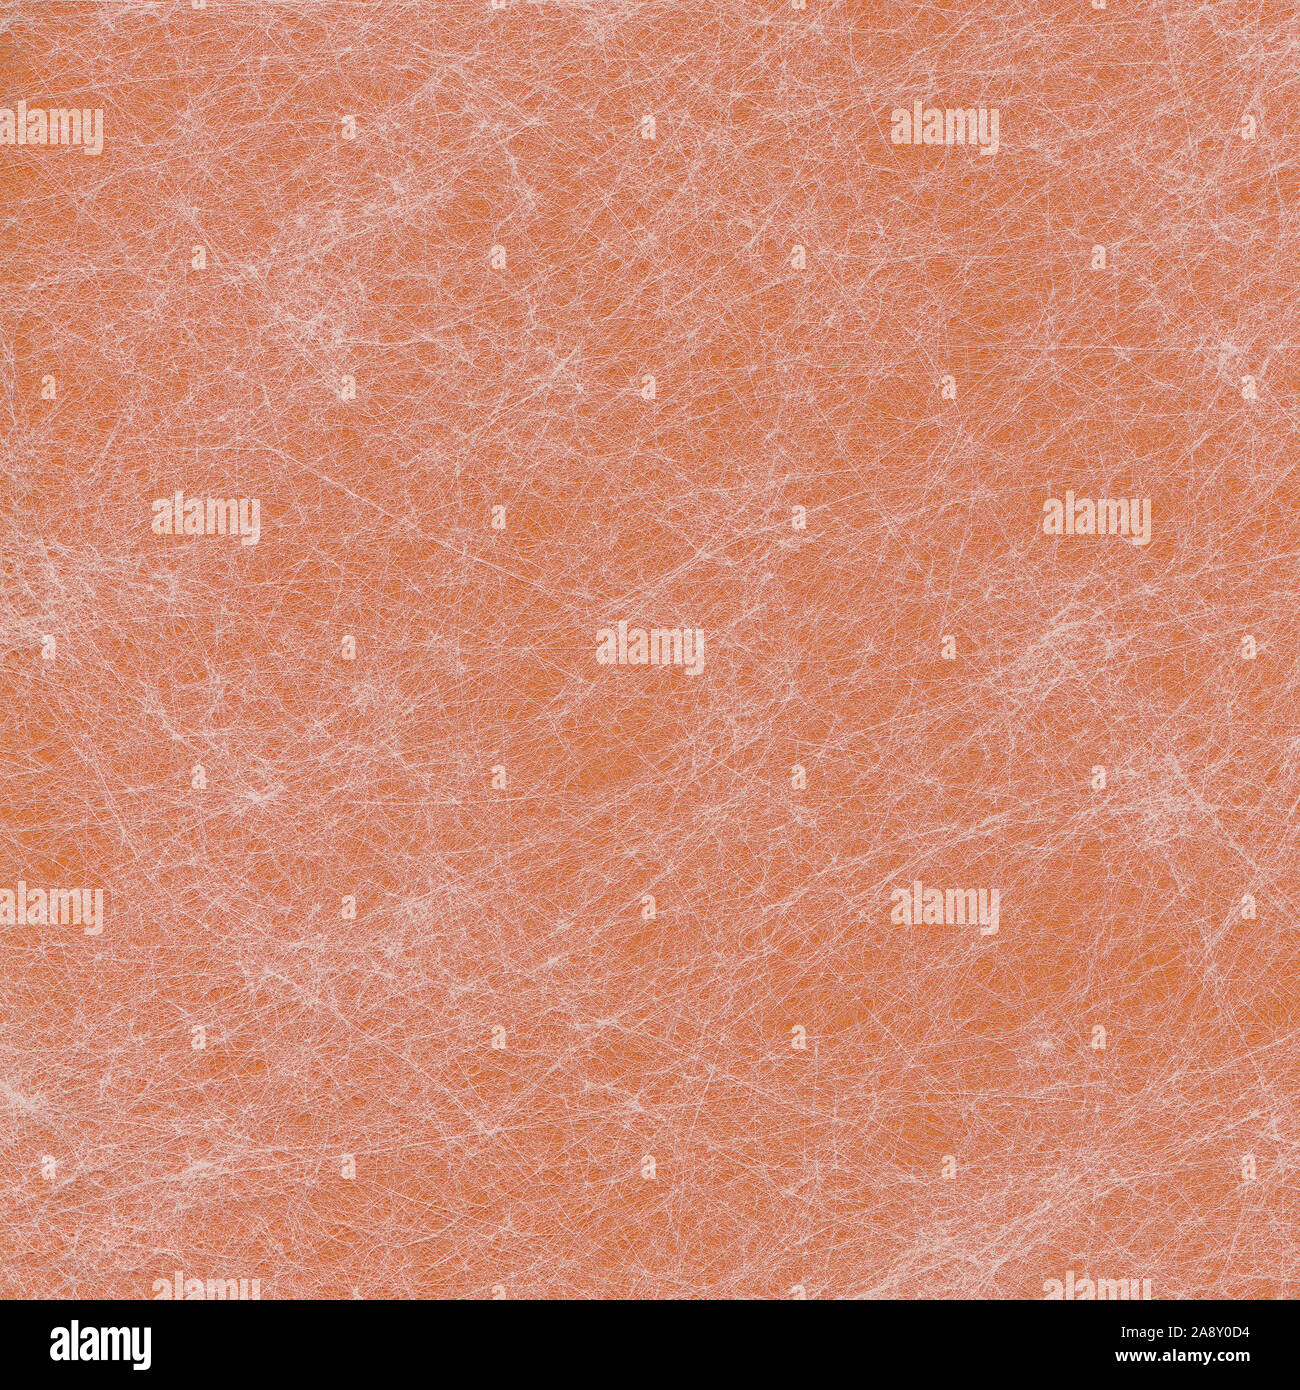 Orange paper background with pattern Stock Photo